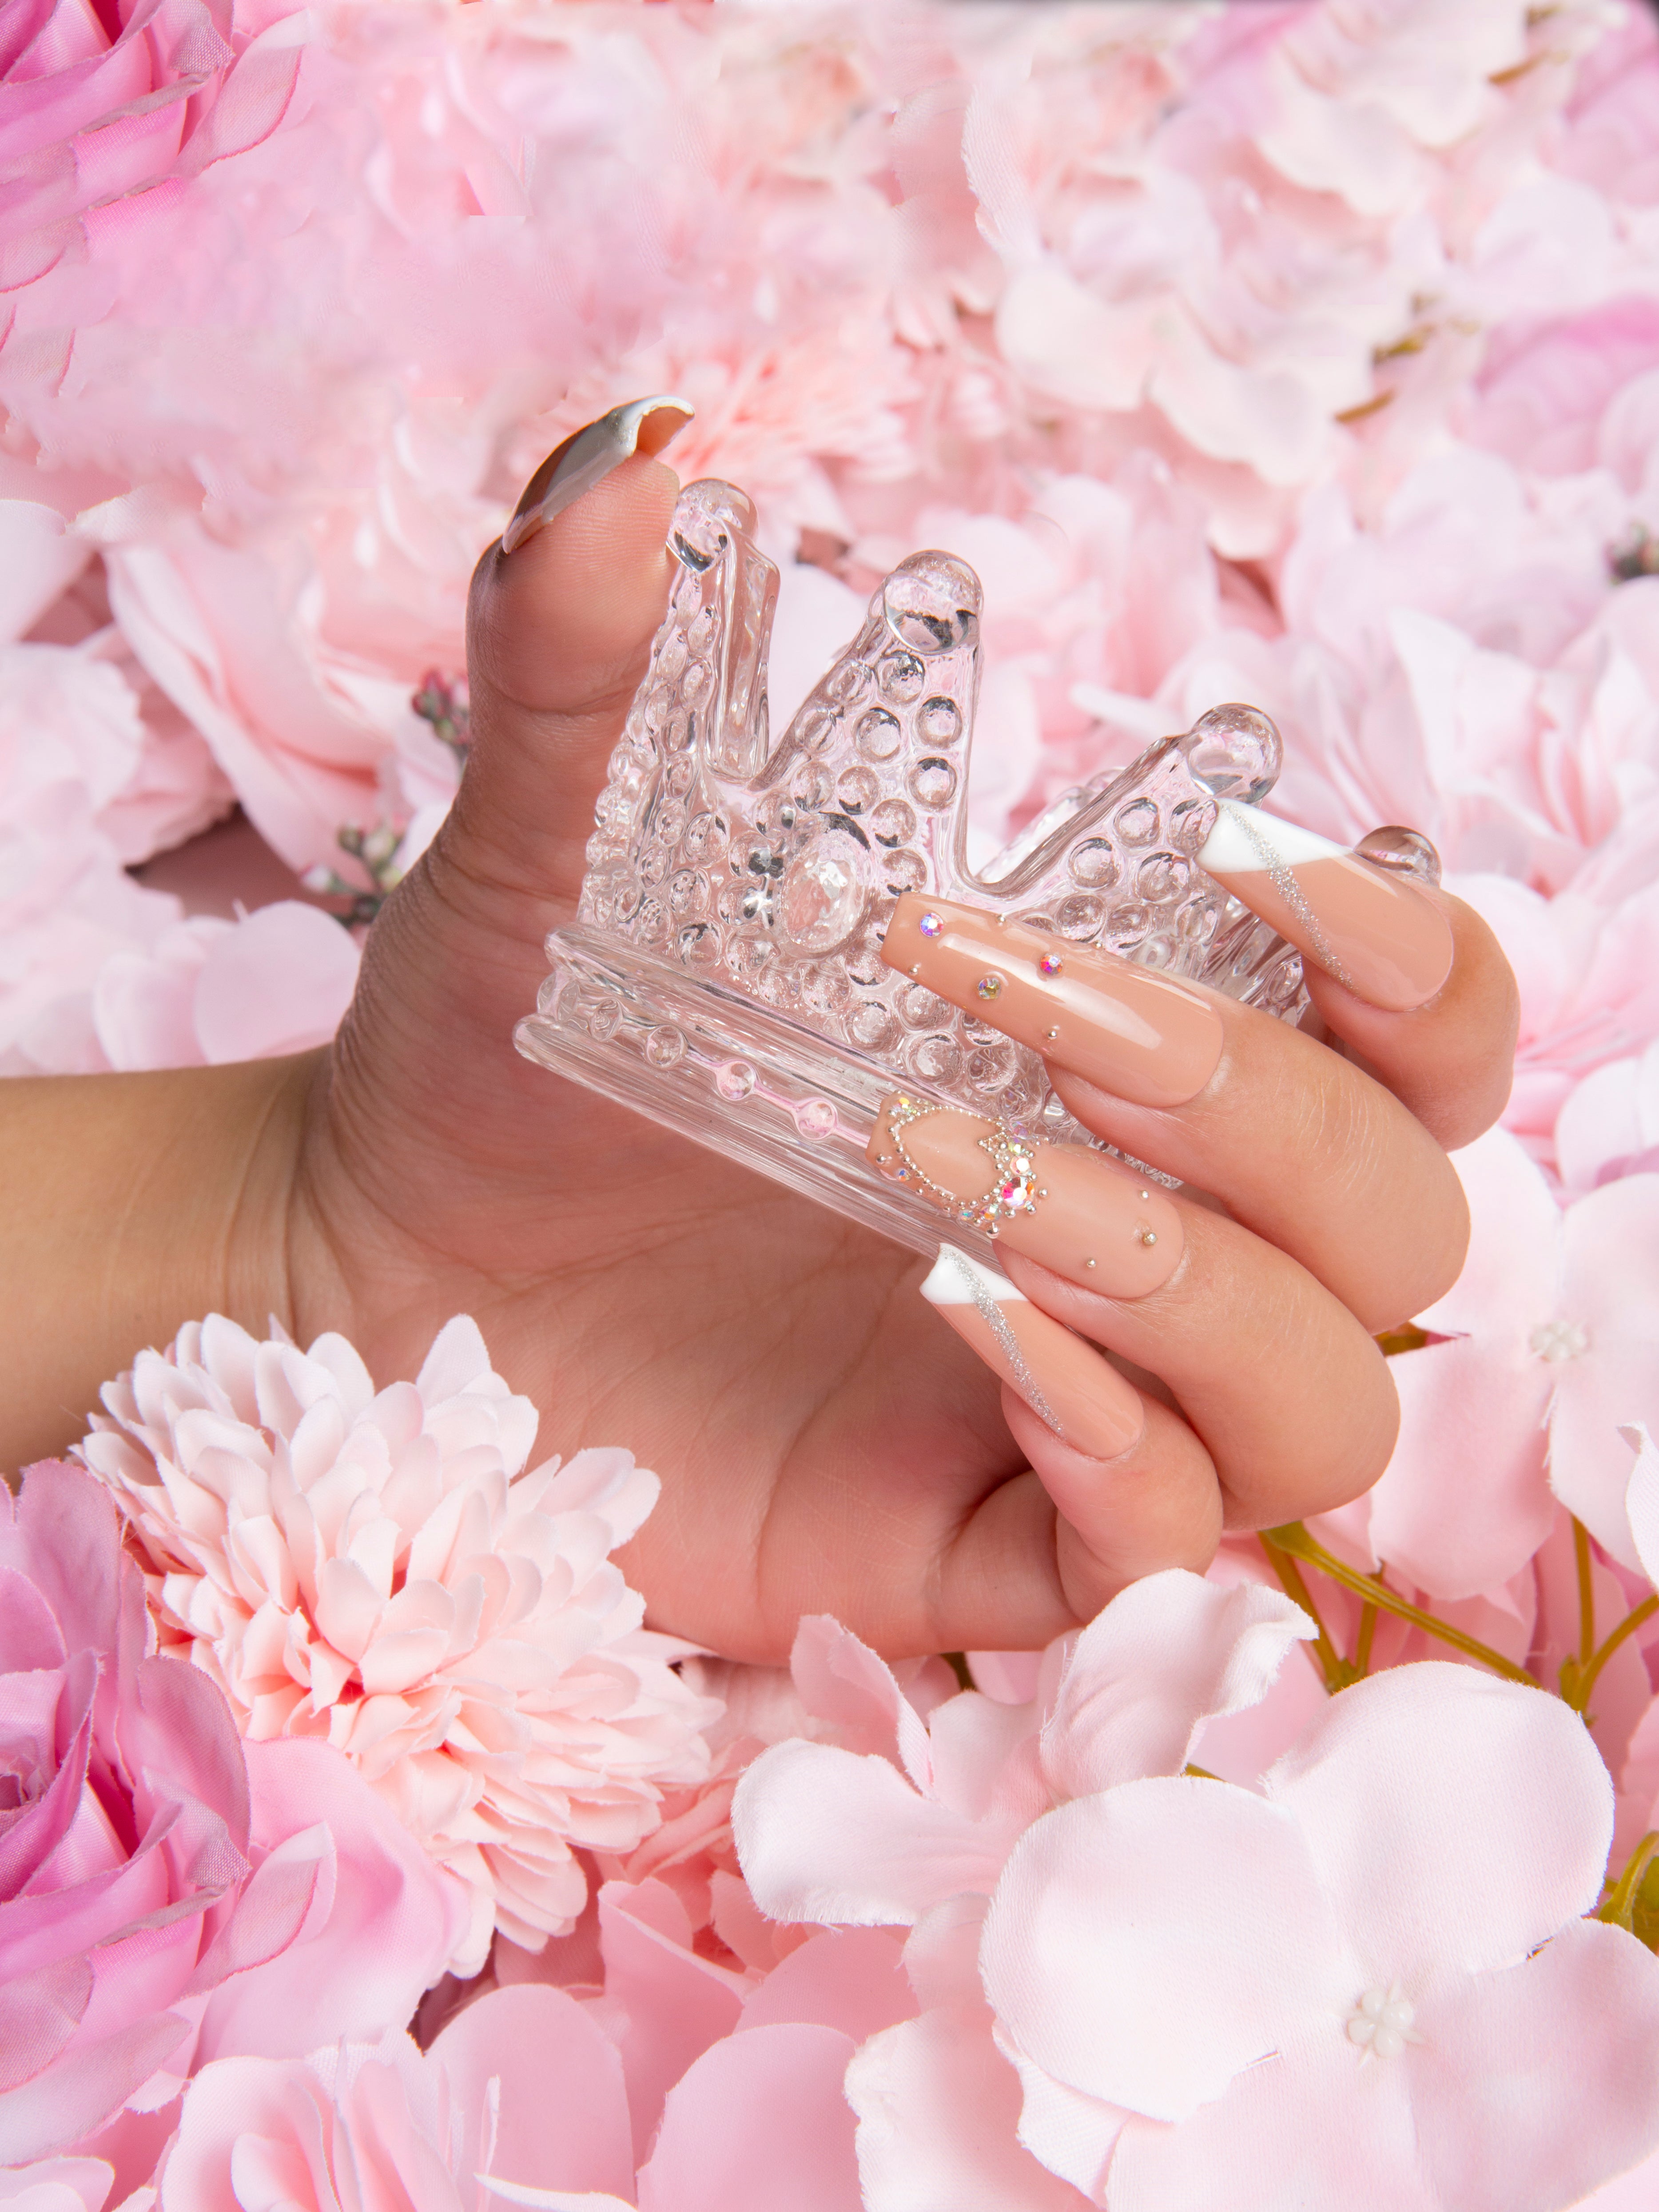 Hand holding a small clear crown surrounded by pink flowers featuring French tip press-on nails with glitter for a sweet and sophisticated manicure from Lovful's 'Lovely Kitten Heels' collection.